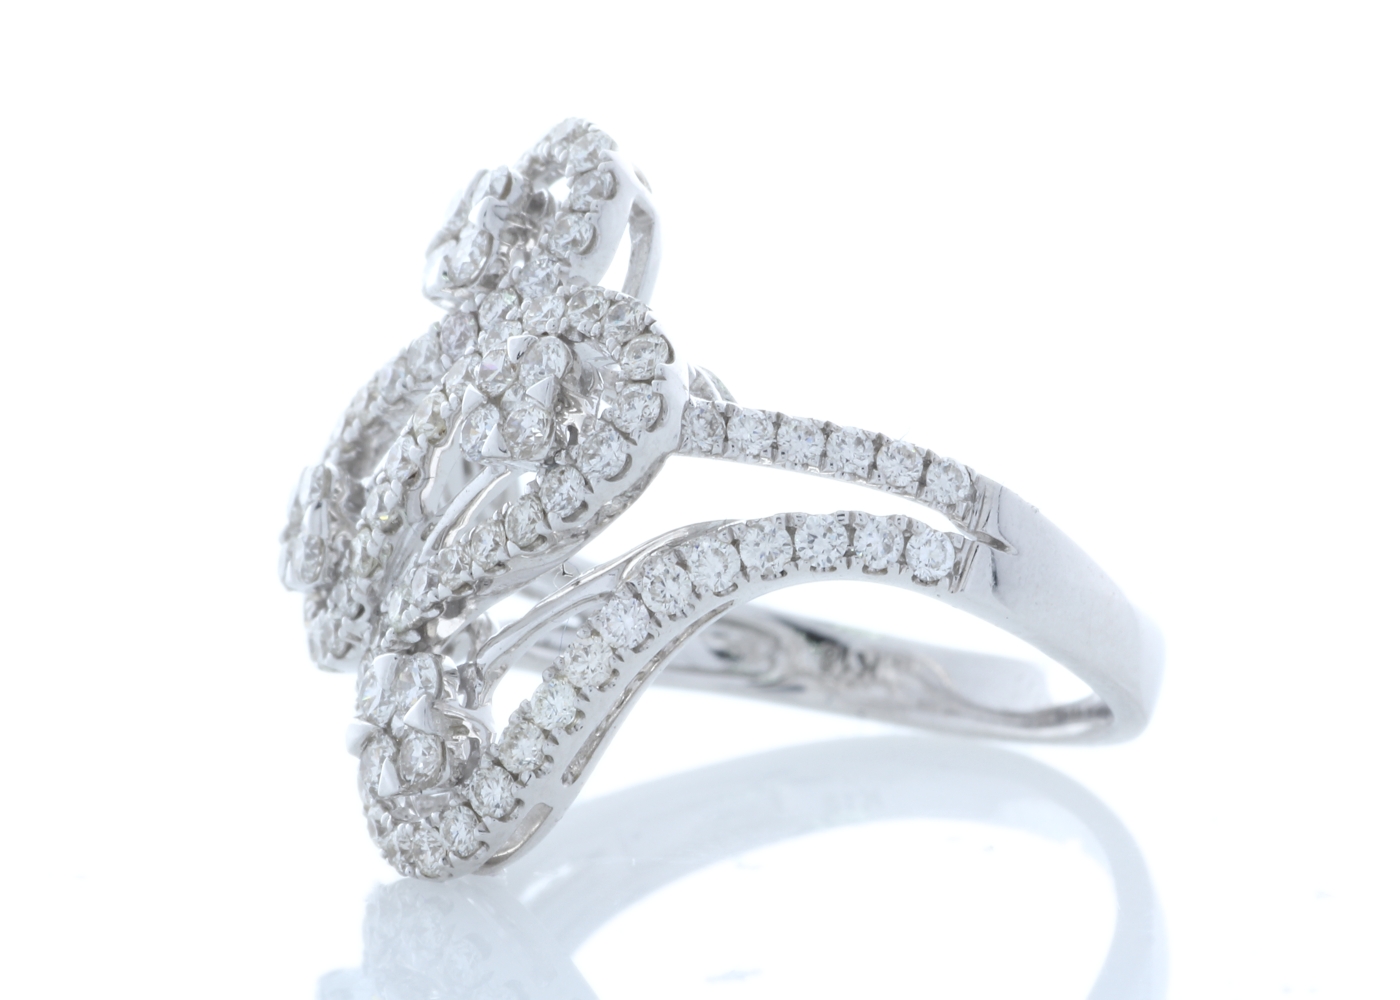 18ct White Gold Fancy Cluster Diamond Ring 1.15 Carats - Image 2 of 4